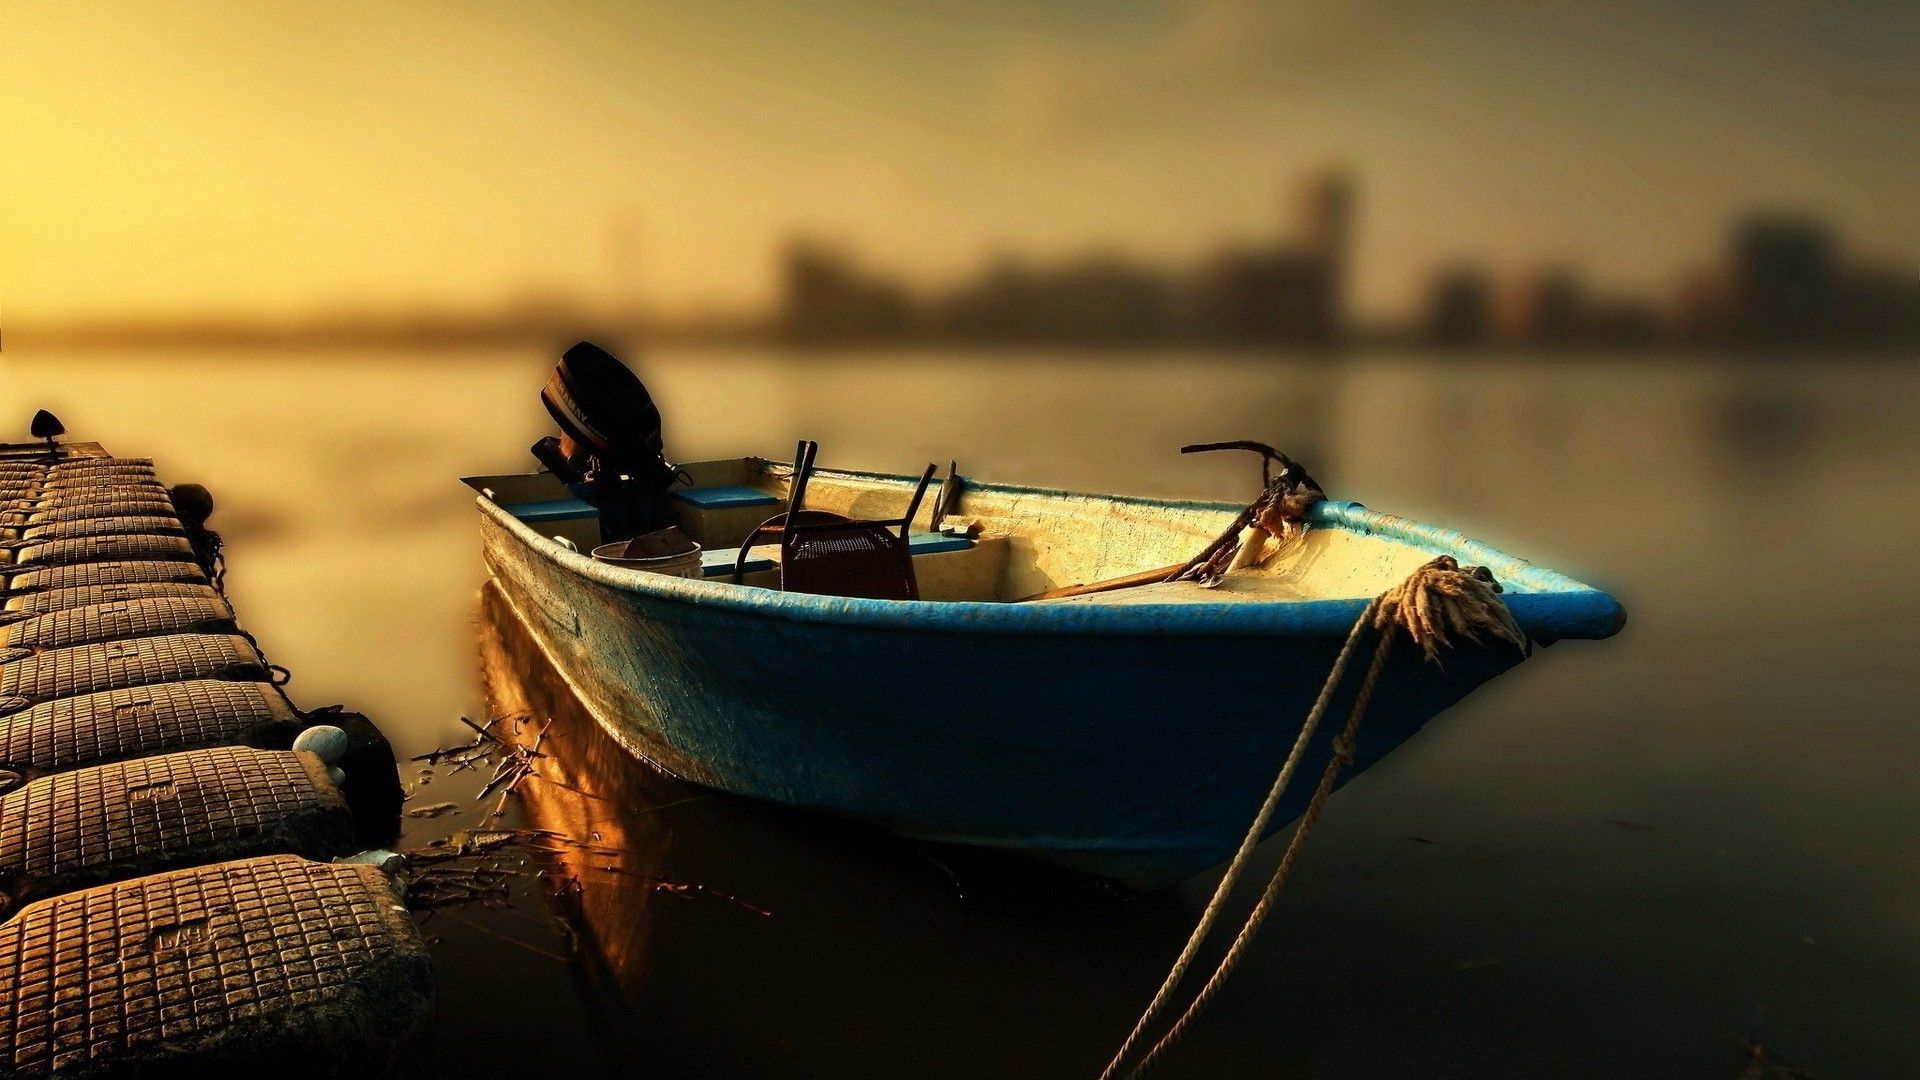 Fishing Boats Desktop Wallpaper, Pictures of Fishing Boats, New